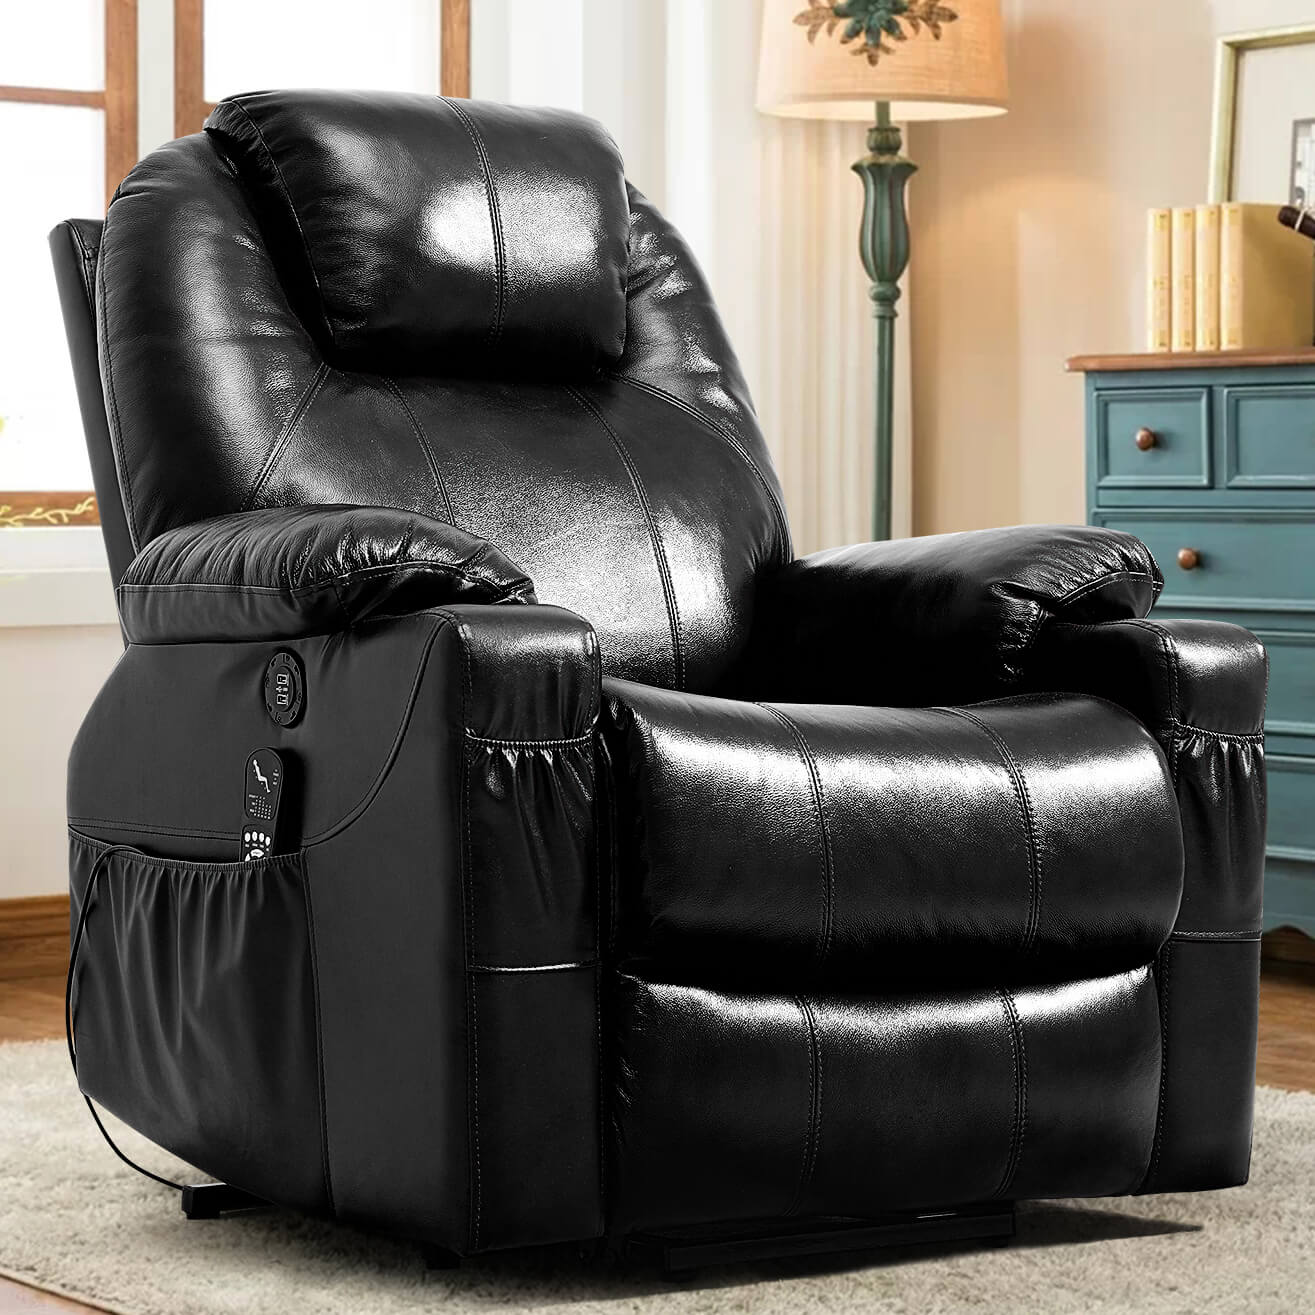 Soulout genuine leather black lift chair recliners